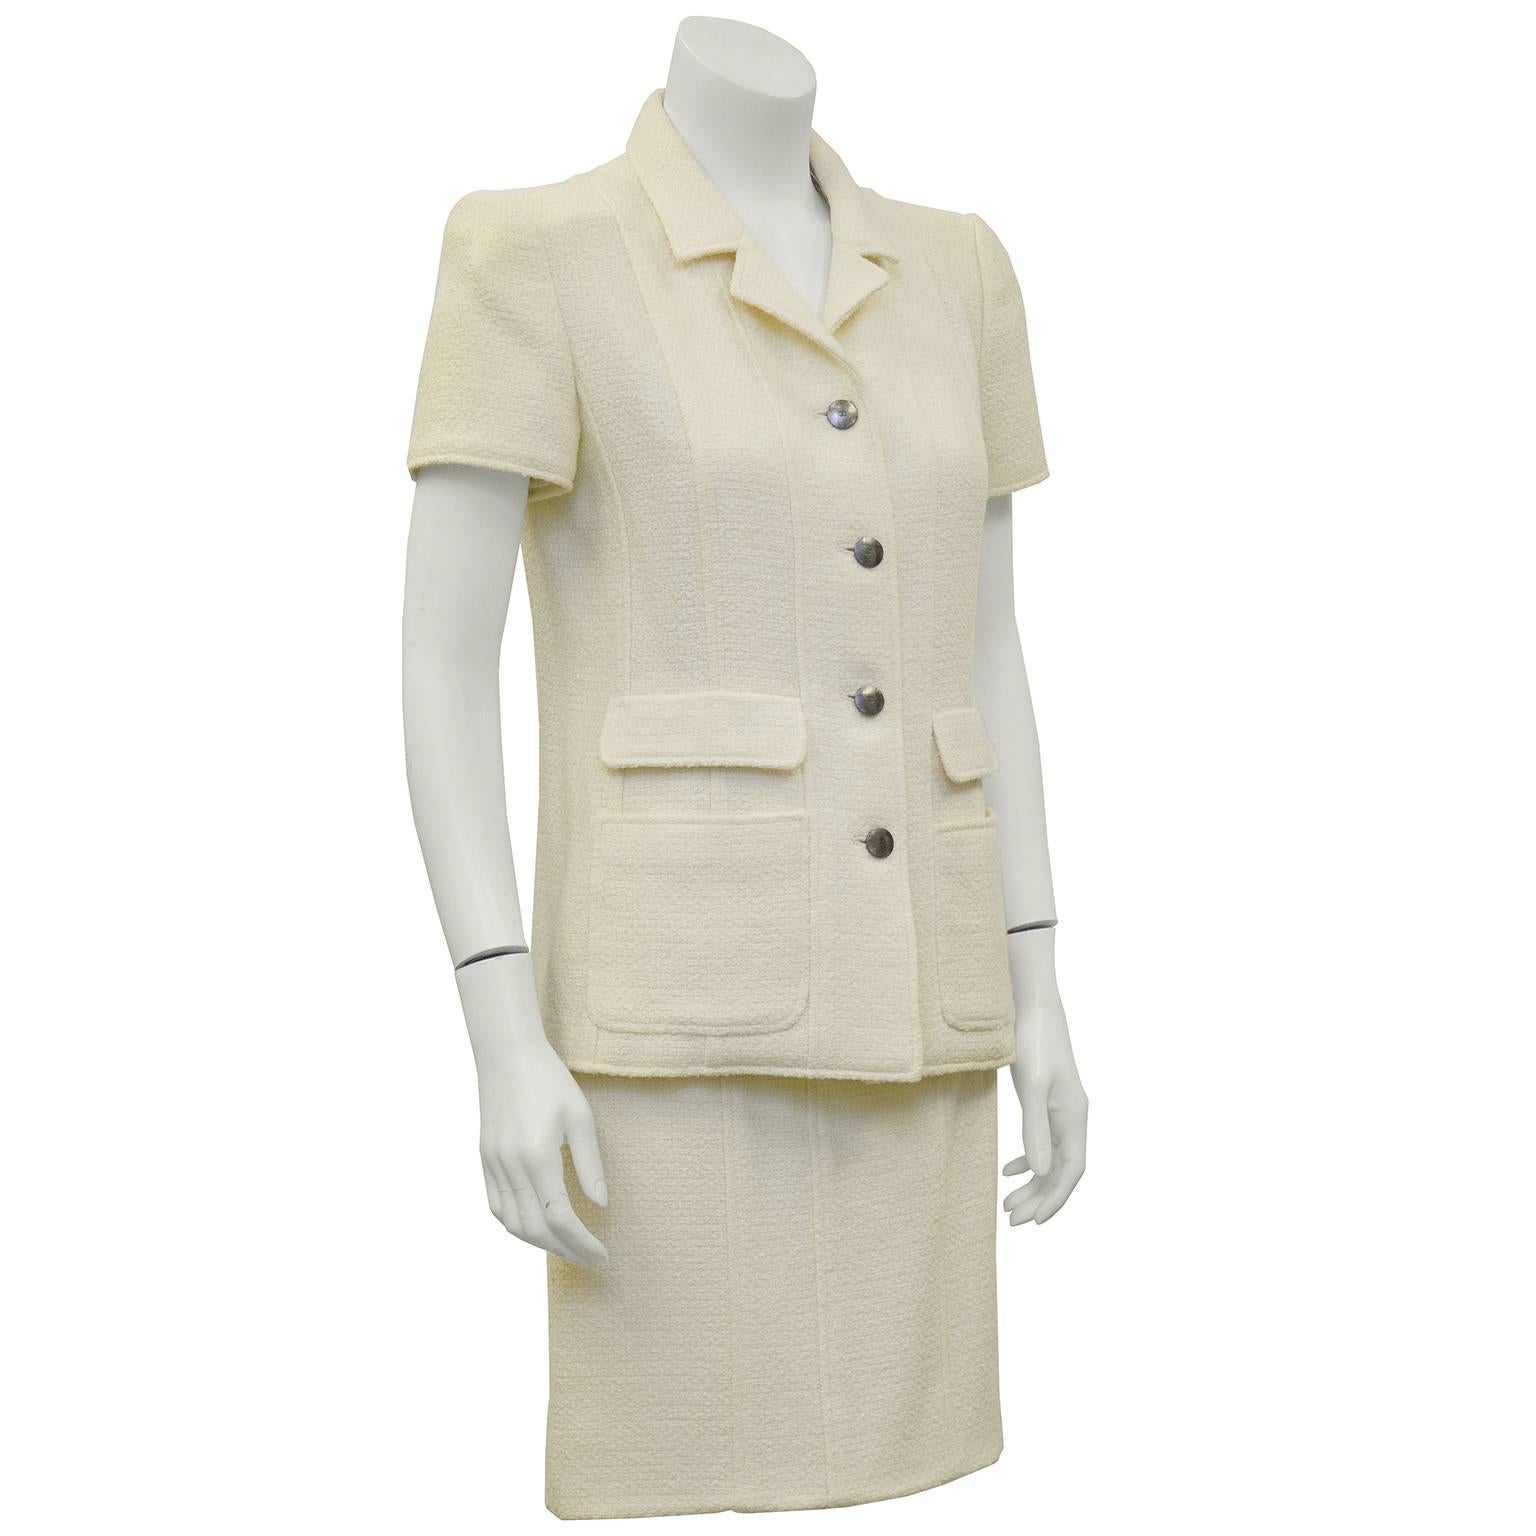 Chanel cream boucle wool and cotton blend short sleeve suit from the 1998 Spring collection. Short sleeve jacket with a notched lapel, silver Chanel buttons down the front and patch and flap pockets. Banded waist skirt with zipper up the back and